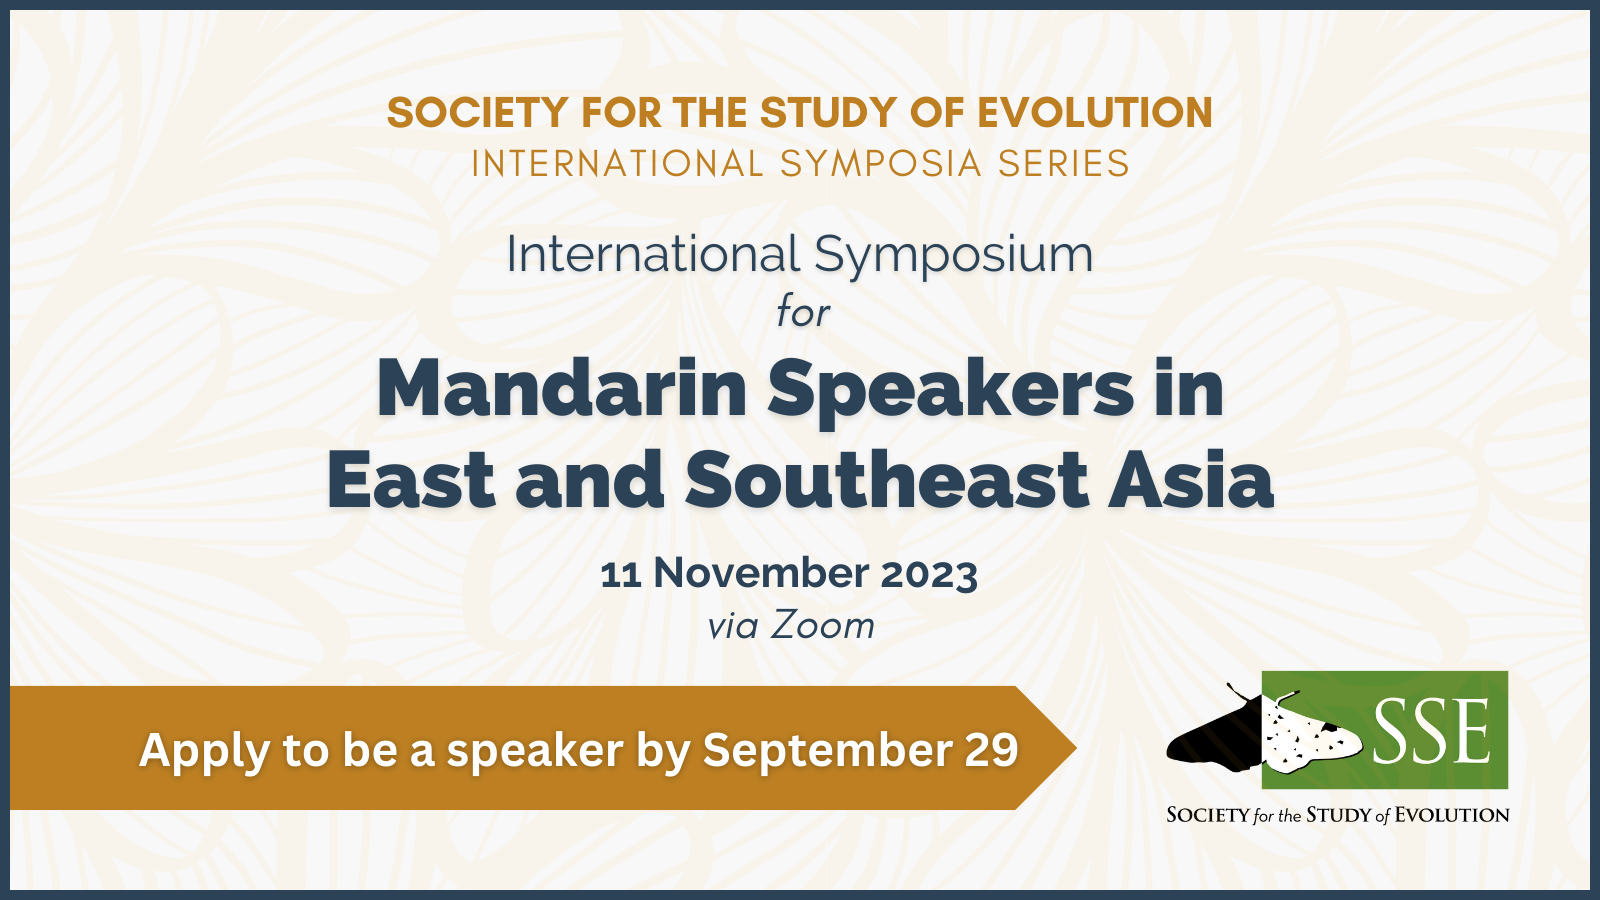 Text: Society for the Study of Evolution, International Symposium for Mandarin Speakers from East and Southeast Asia, 11 November 2023, via Zoom. Apply to be a speaker by September 29. SSE logo.